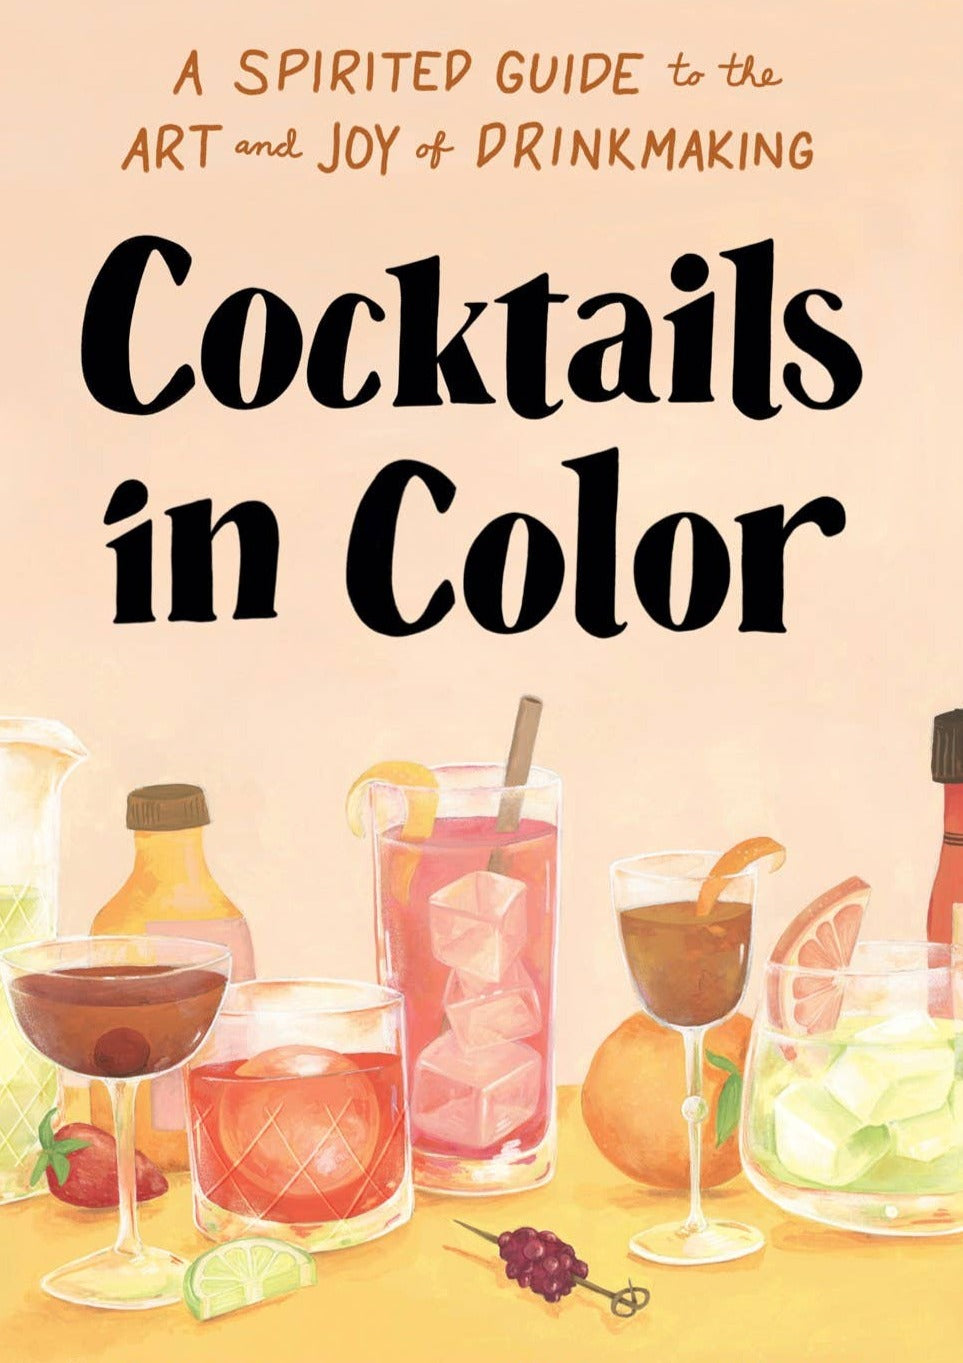 Cocktails in Color Cocktail Book